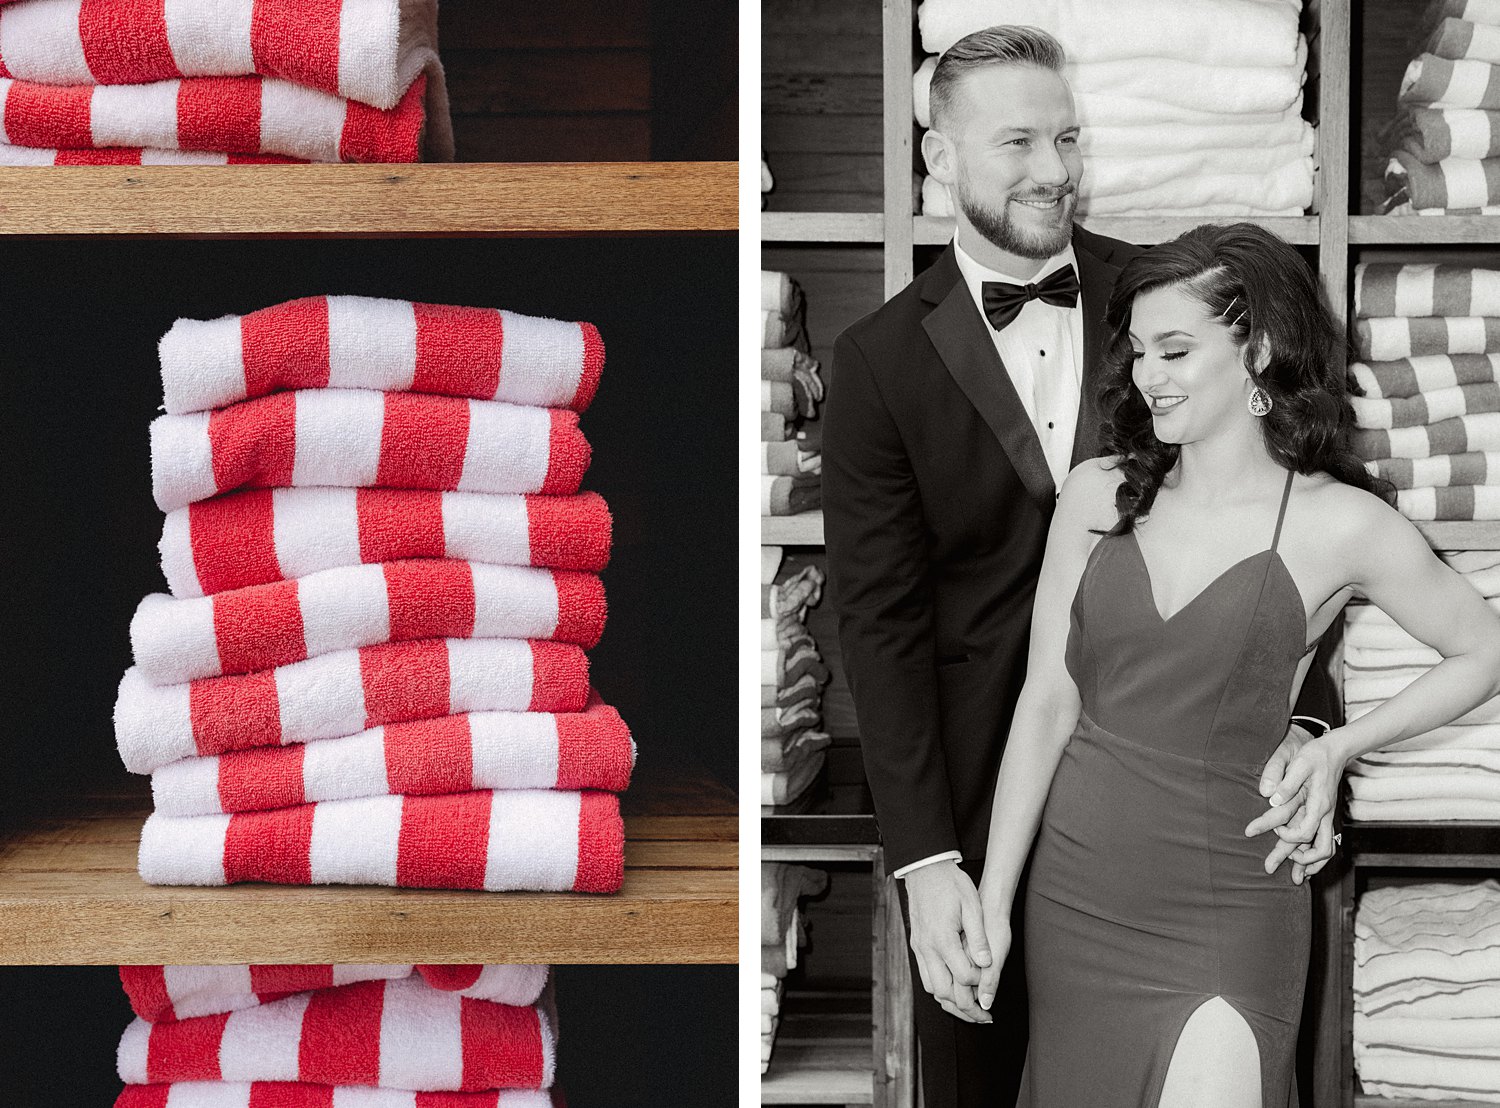 Woman in Dress standing with man in black tuxedo pool side red and white striped towels